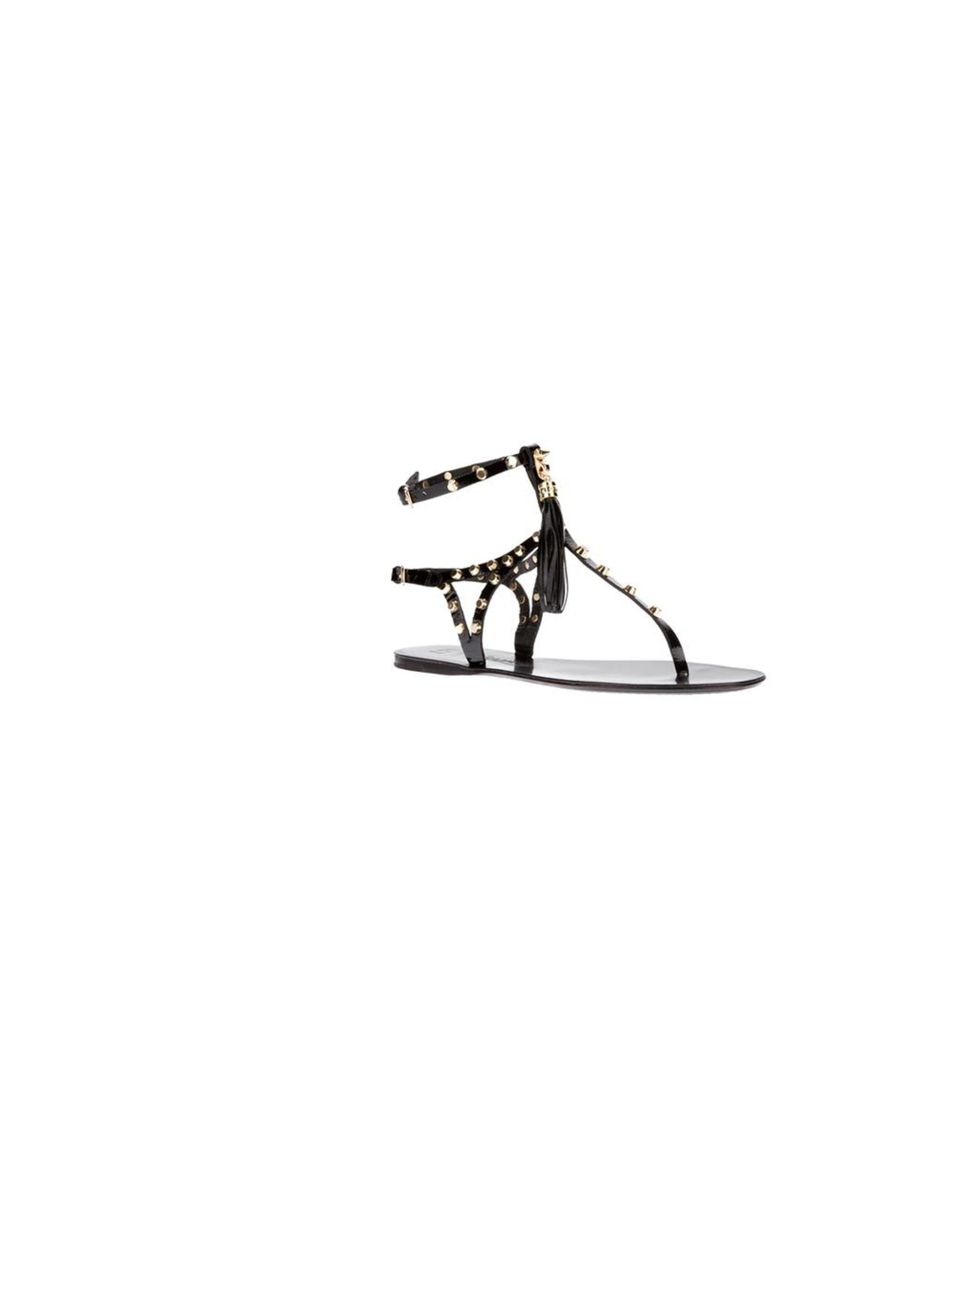 <p>Give your look an edge with studded sandals, Ioannis flats, £129.90, at <a href="http://www.farfetch.com/shopping/women/ioannis-studded-t-bar-sandal-item-10422981.aspx?storeid=9339">Farfetch.com</a></p>